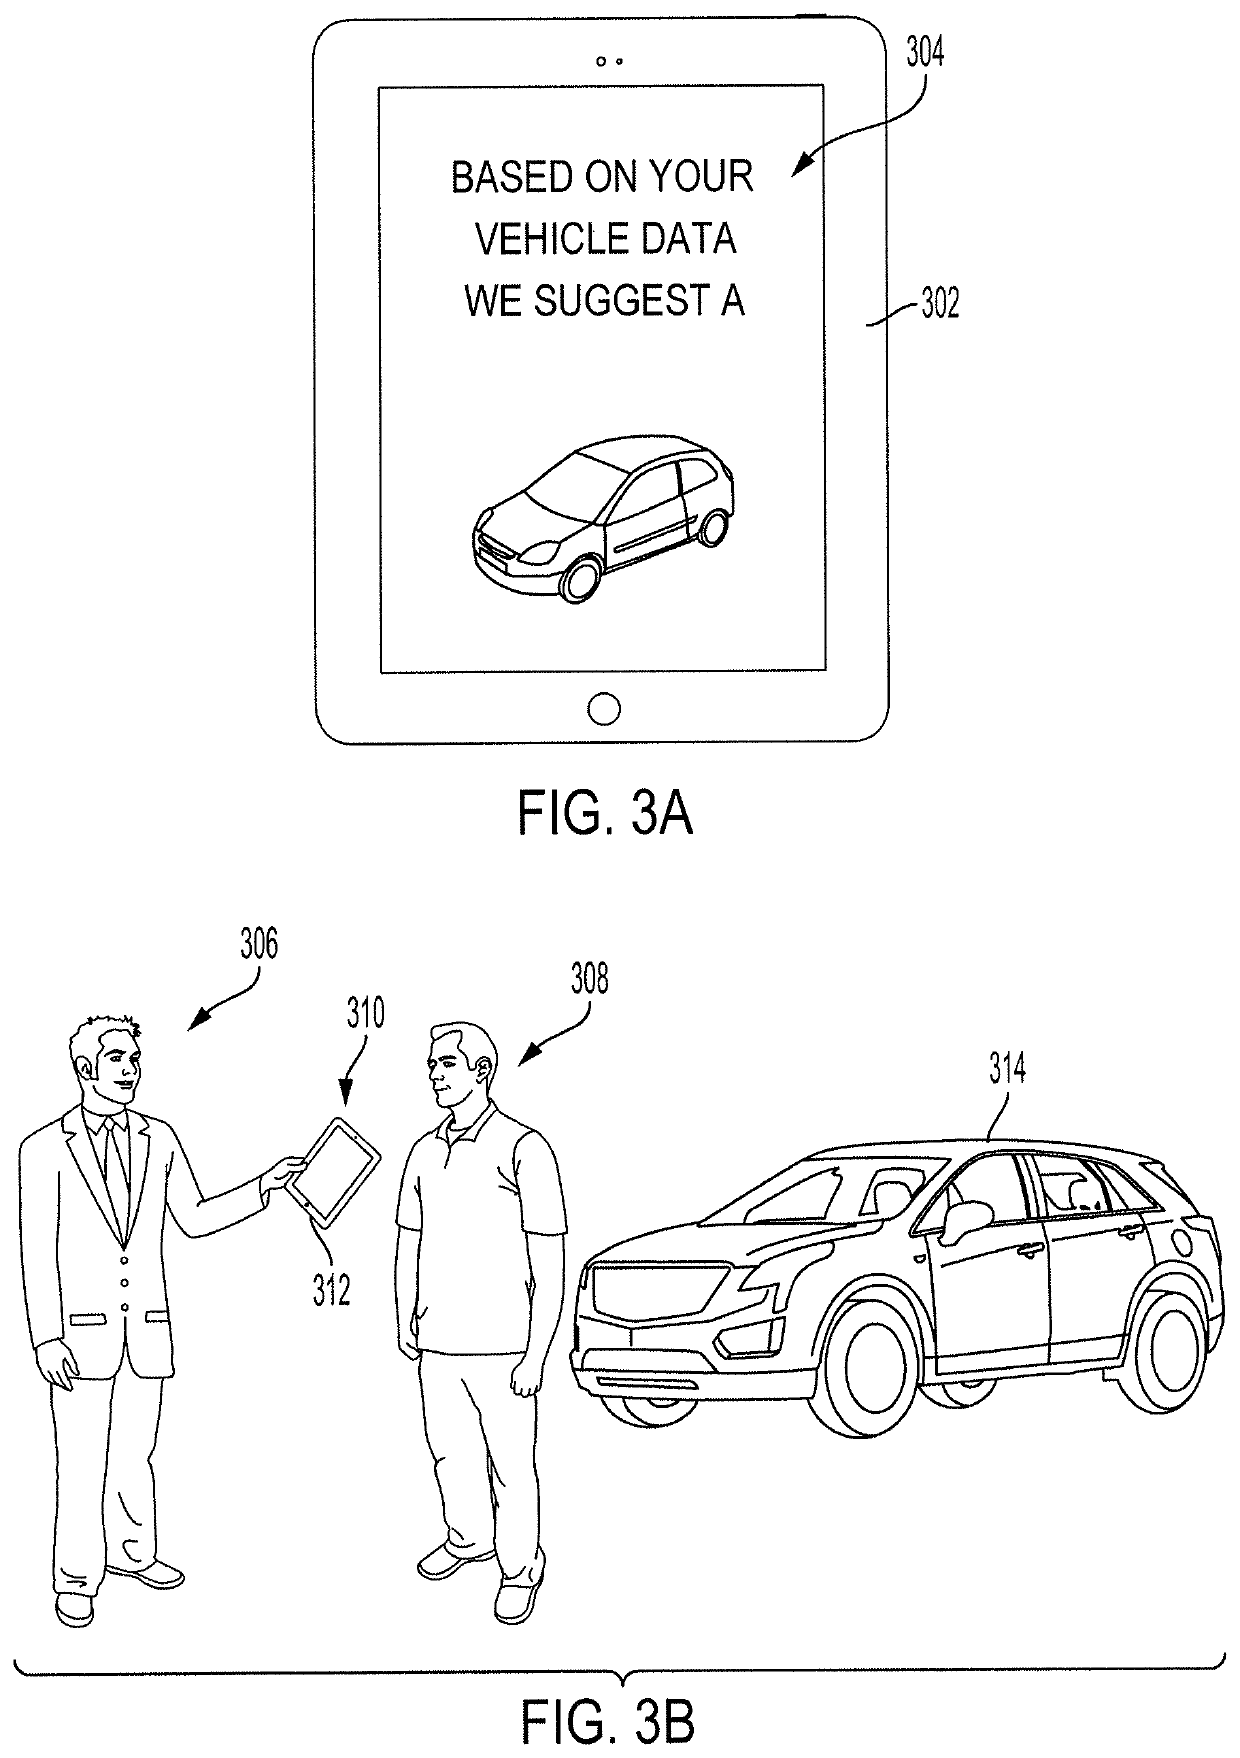 Vehicle recommendation system using sensors